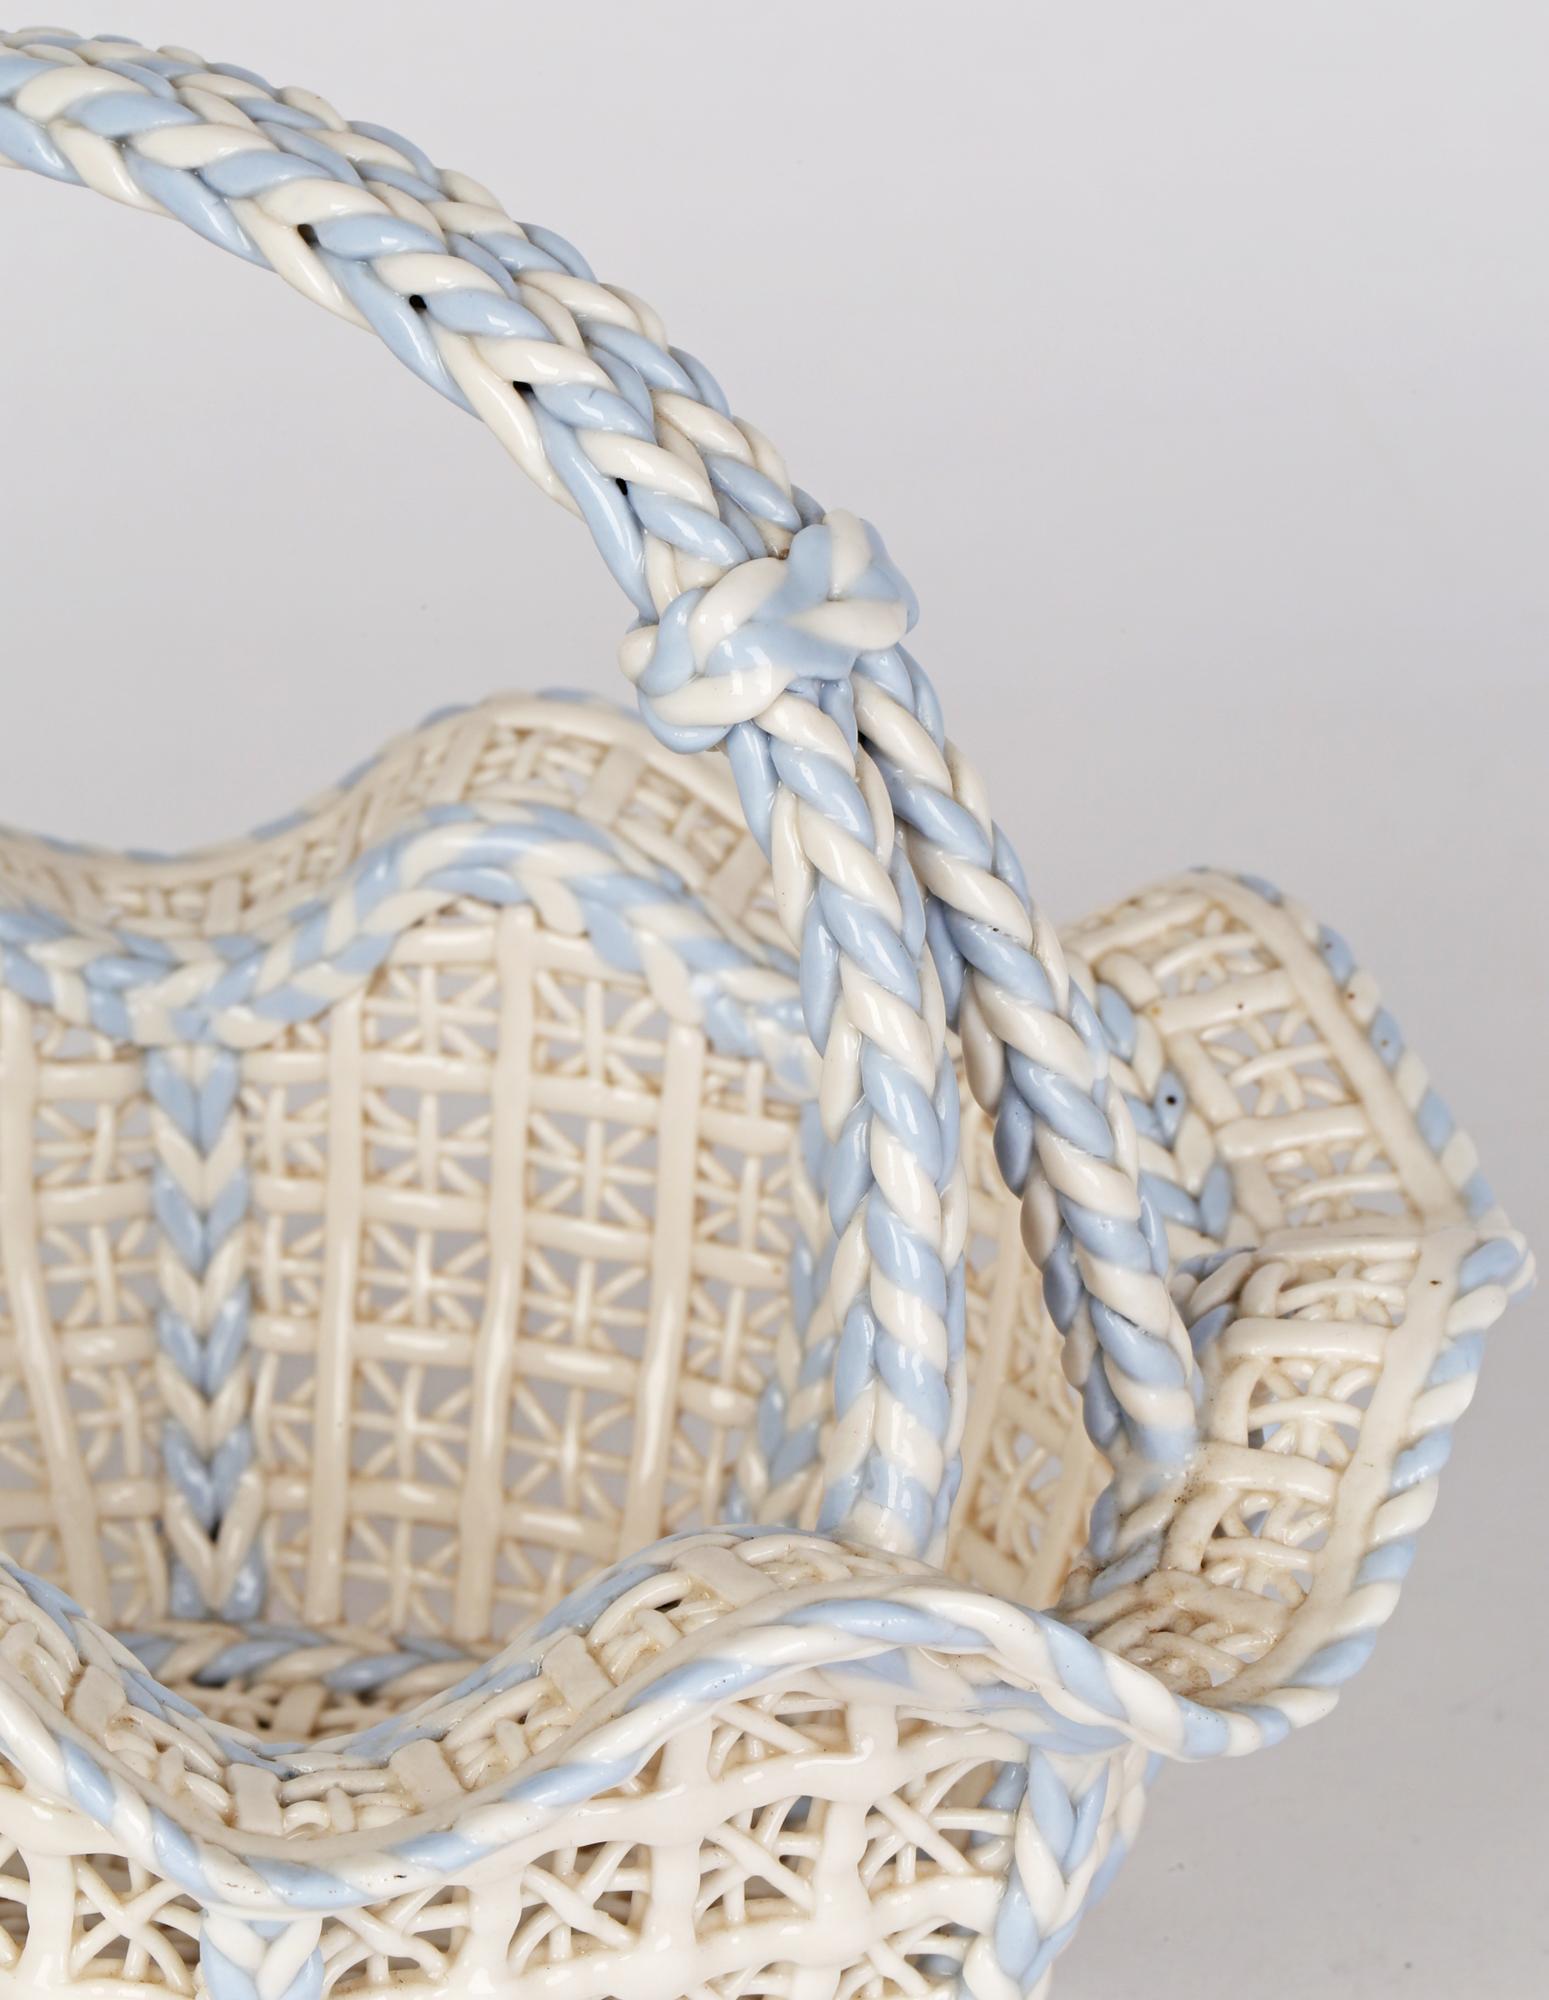 This must be one of the finest made pieces of porcelain we have encountered. A rare and exceptional antique porcelain open work handled basket, probably English and dating from the 19th century. The basket has an octagonal shaped body with panels